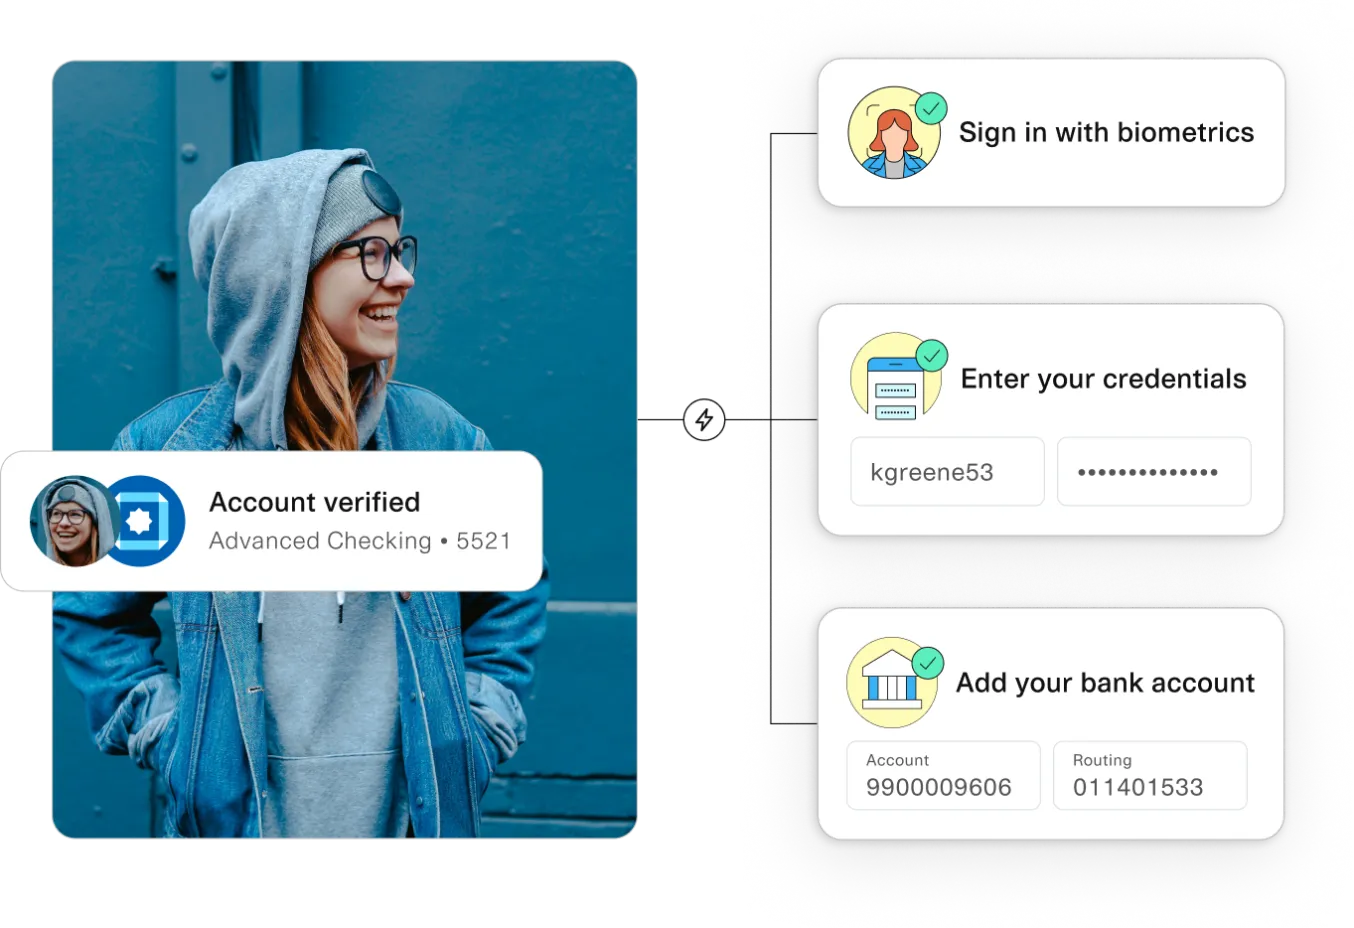 A multi-step process for setting up a bank account. On the left, there's a photo of a smiling person wearing a grey hoodie and denim jacket, with a badge indicating "Account verified" for "Advanced Checking • 5521". On the right, three steps are illustrated: "Sign in with biometrics" (icon of a person with a checkmark), "Enter your credentials" (login form icon, example username: kgreene53), and "Add your bank account" (bank icon, example account: 9900009606, routing: 011401533). The layout connects these steps to indicate the process flow.